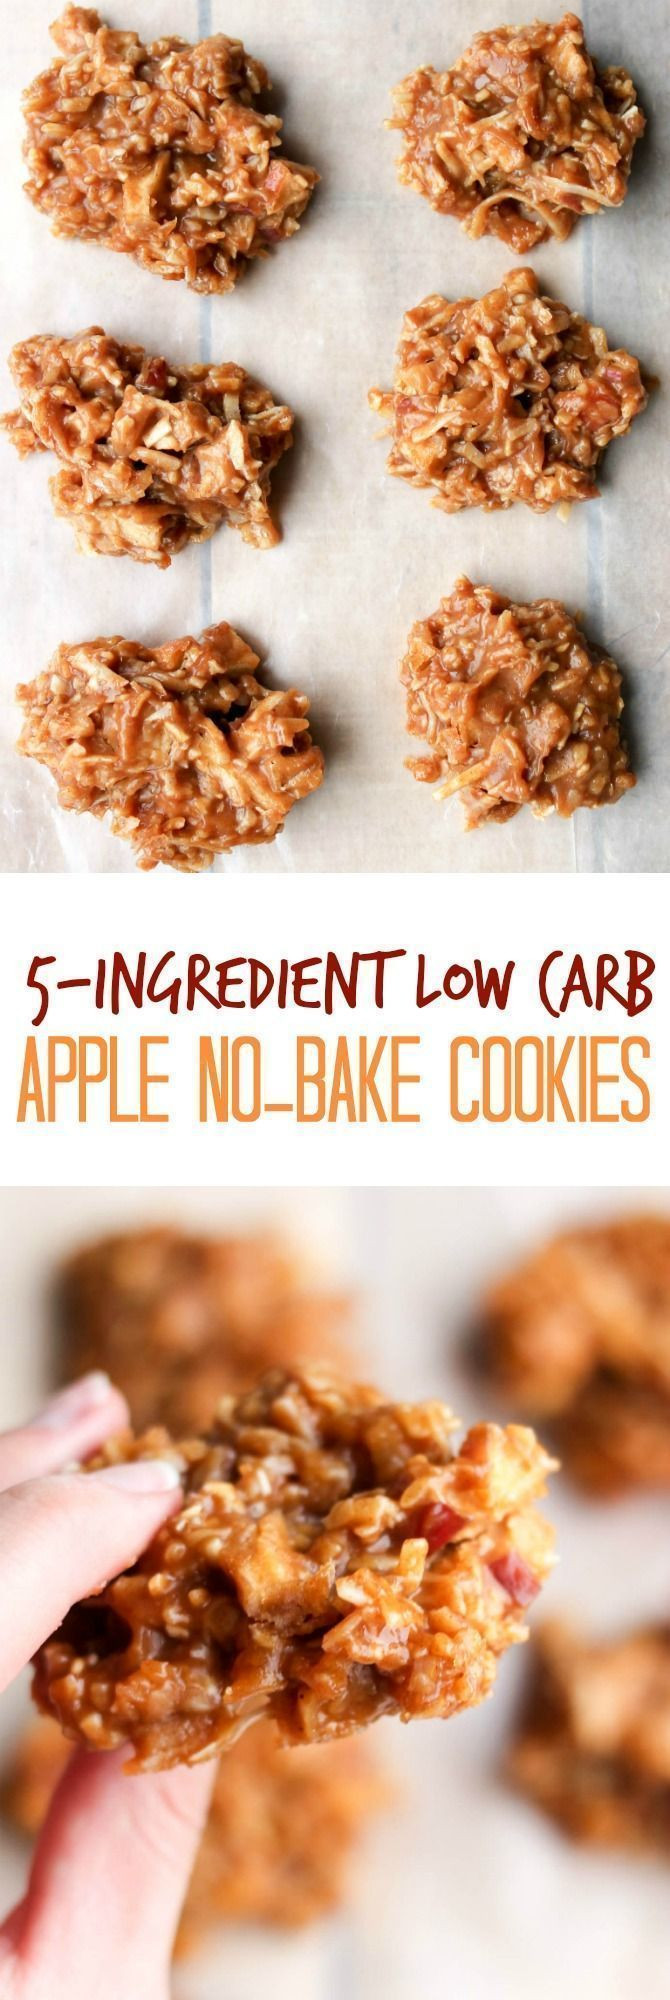 Low Carb Gourmet Recipes
 5 Minute Low Carb Apple No Bake Cookies Recipe